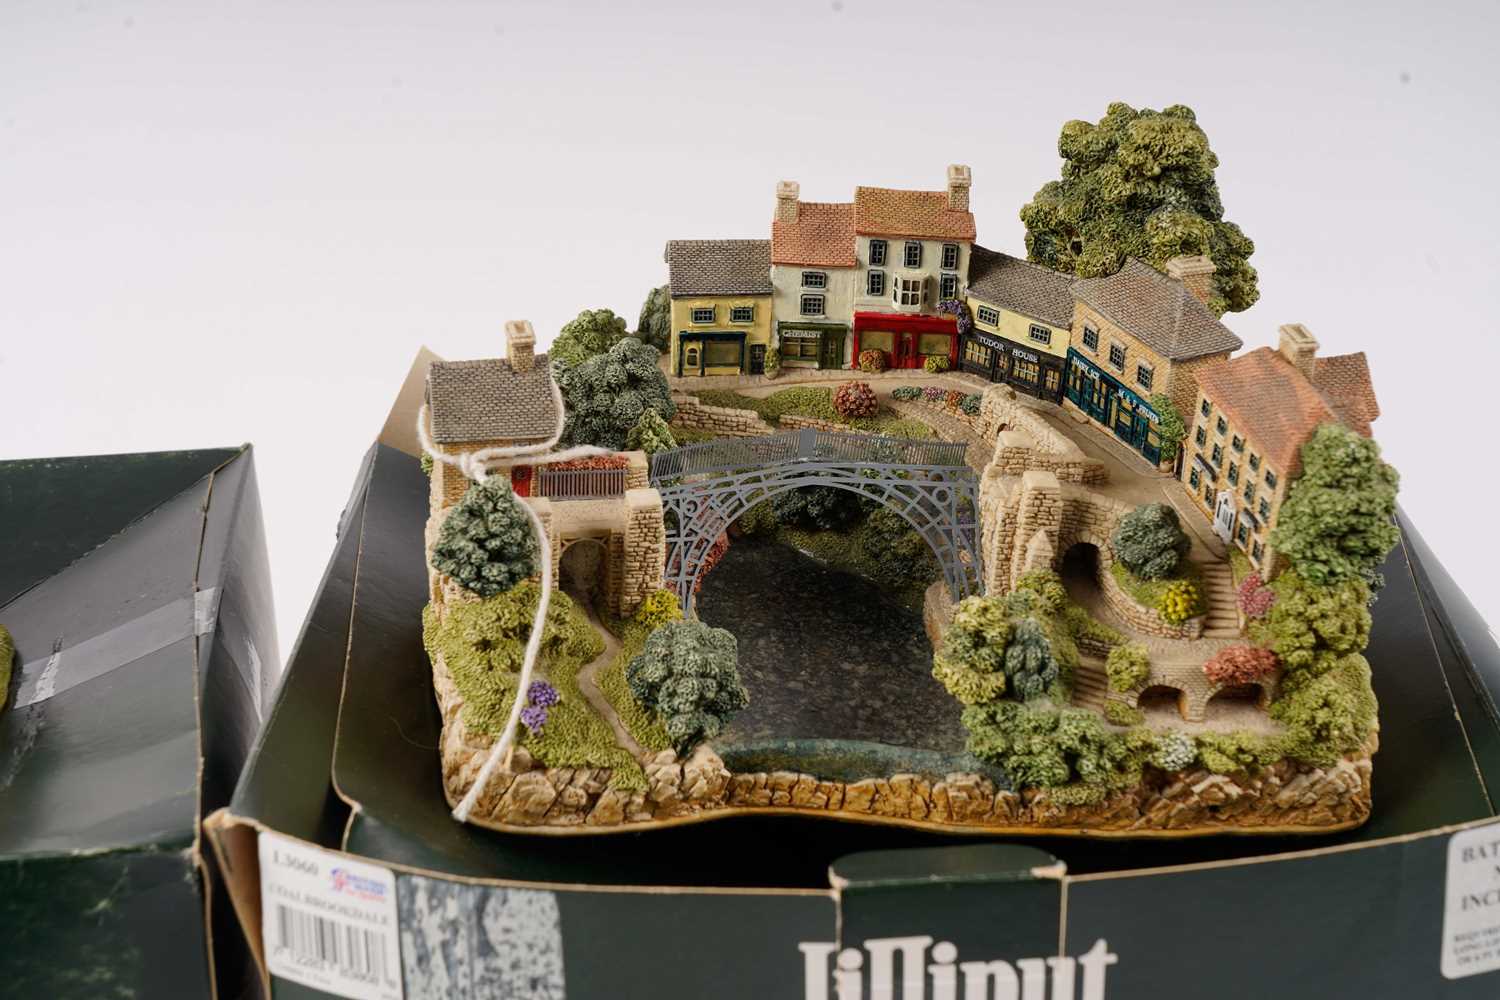 Two lilliput lane cottages - Image 2 of 10